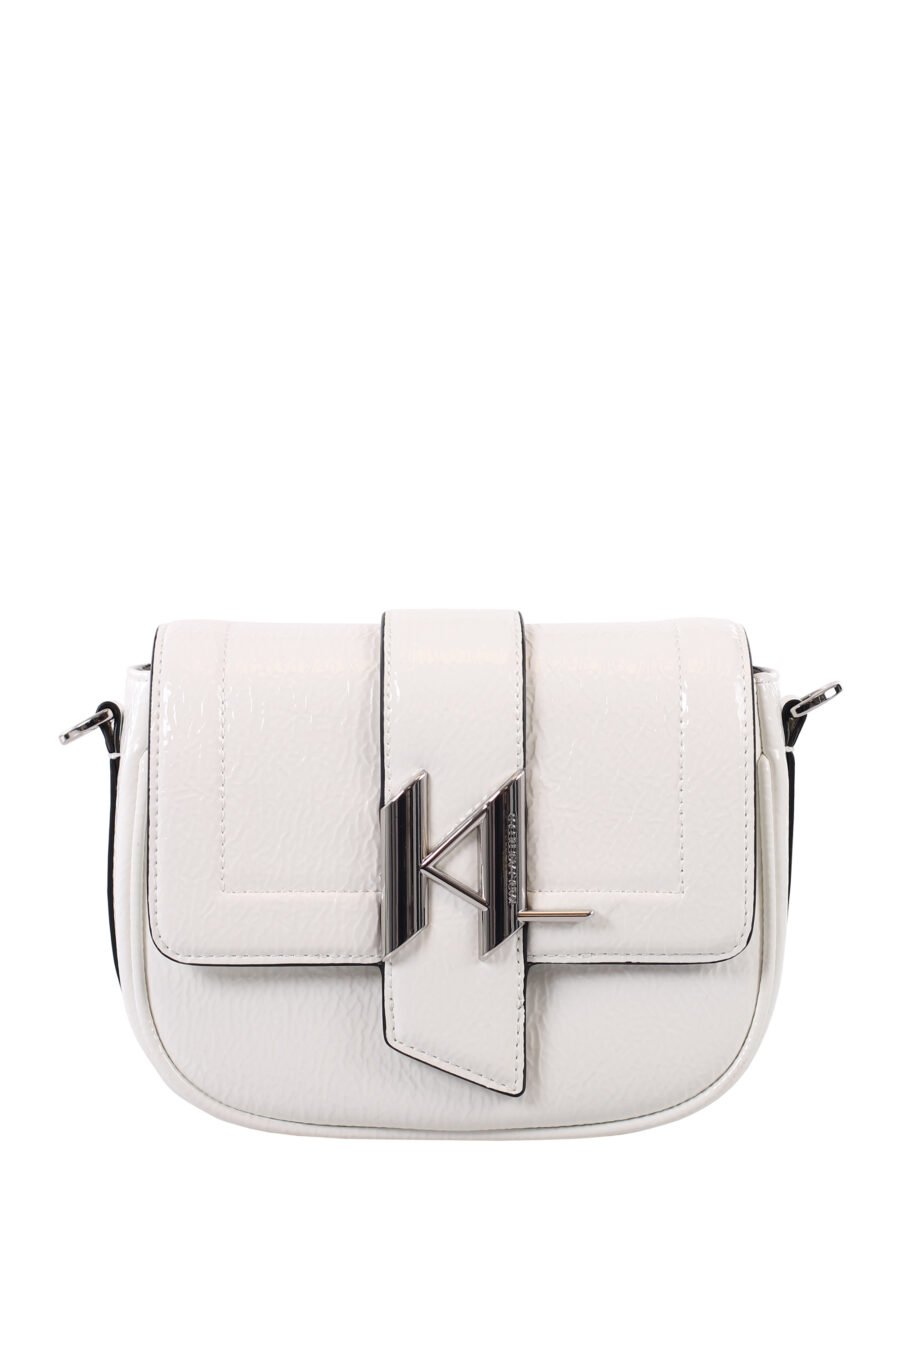 Small white flap shoulder bag with metal logo - IMG 1733